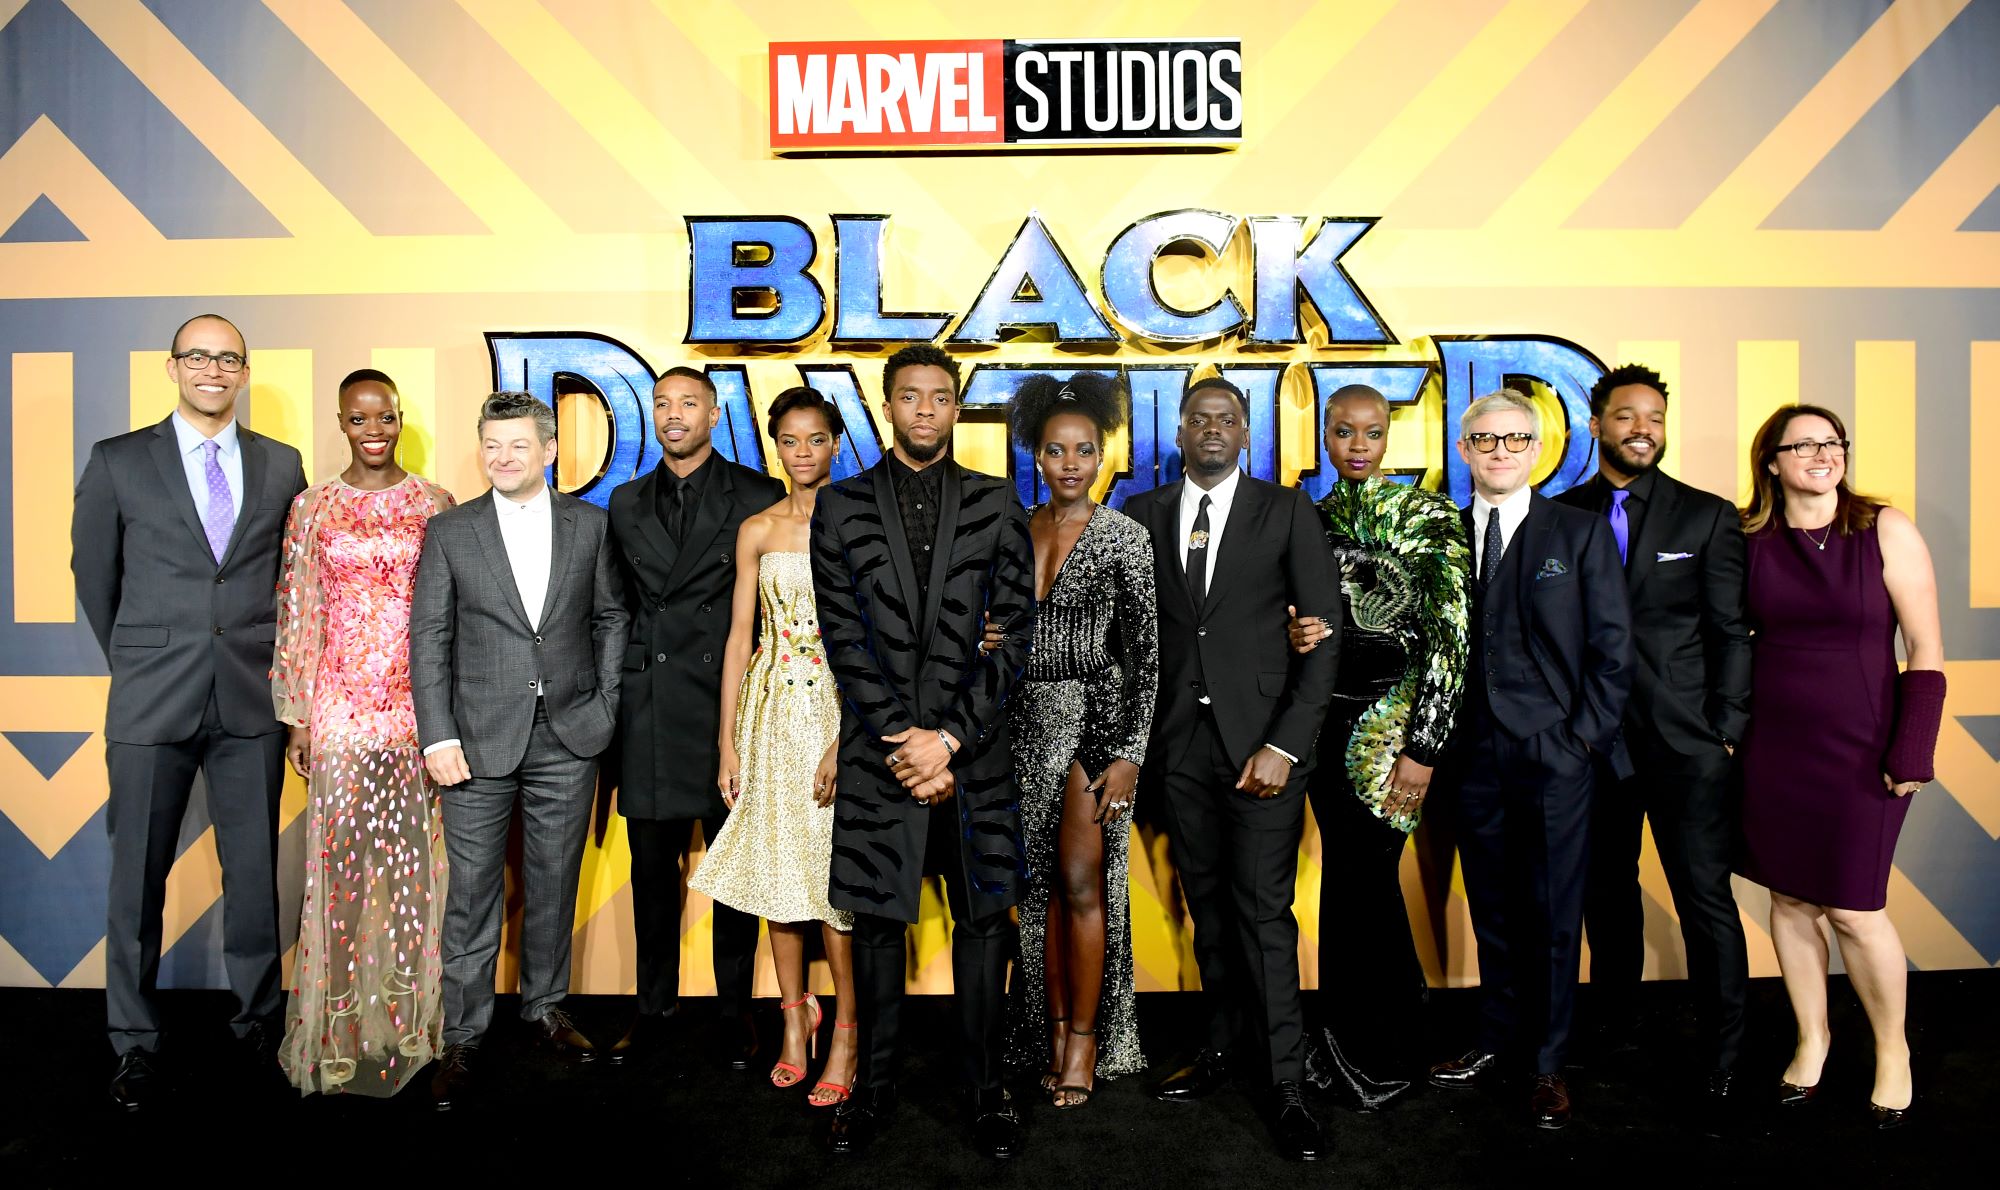 The 'Black Panther' cast, who won't all return for the sequel, pose with the crew on the red carpet at the premiere.